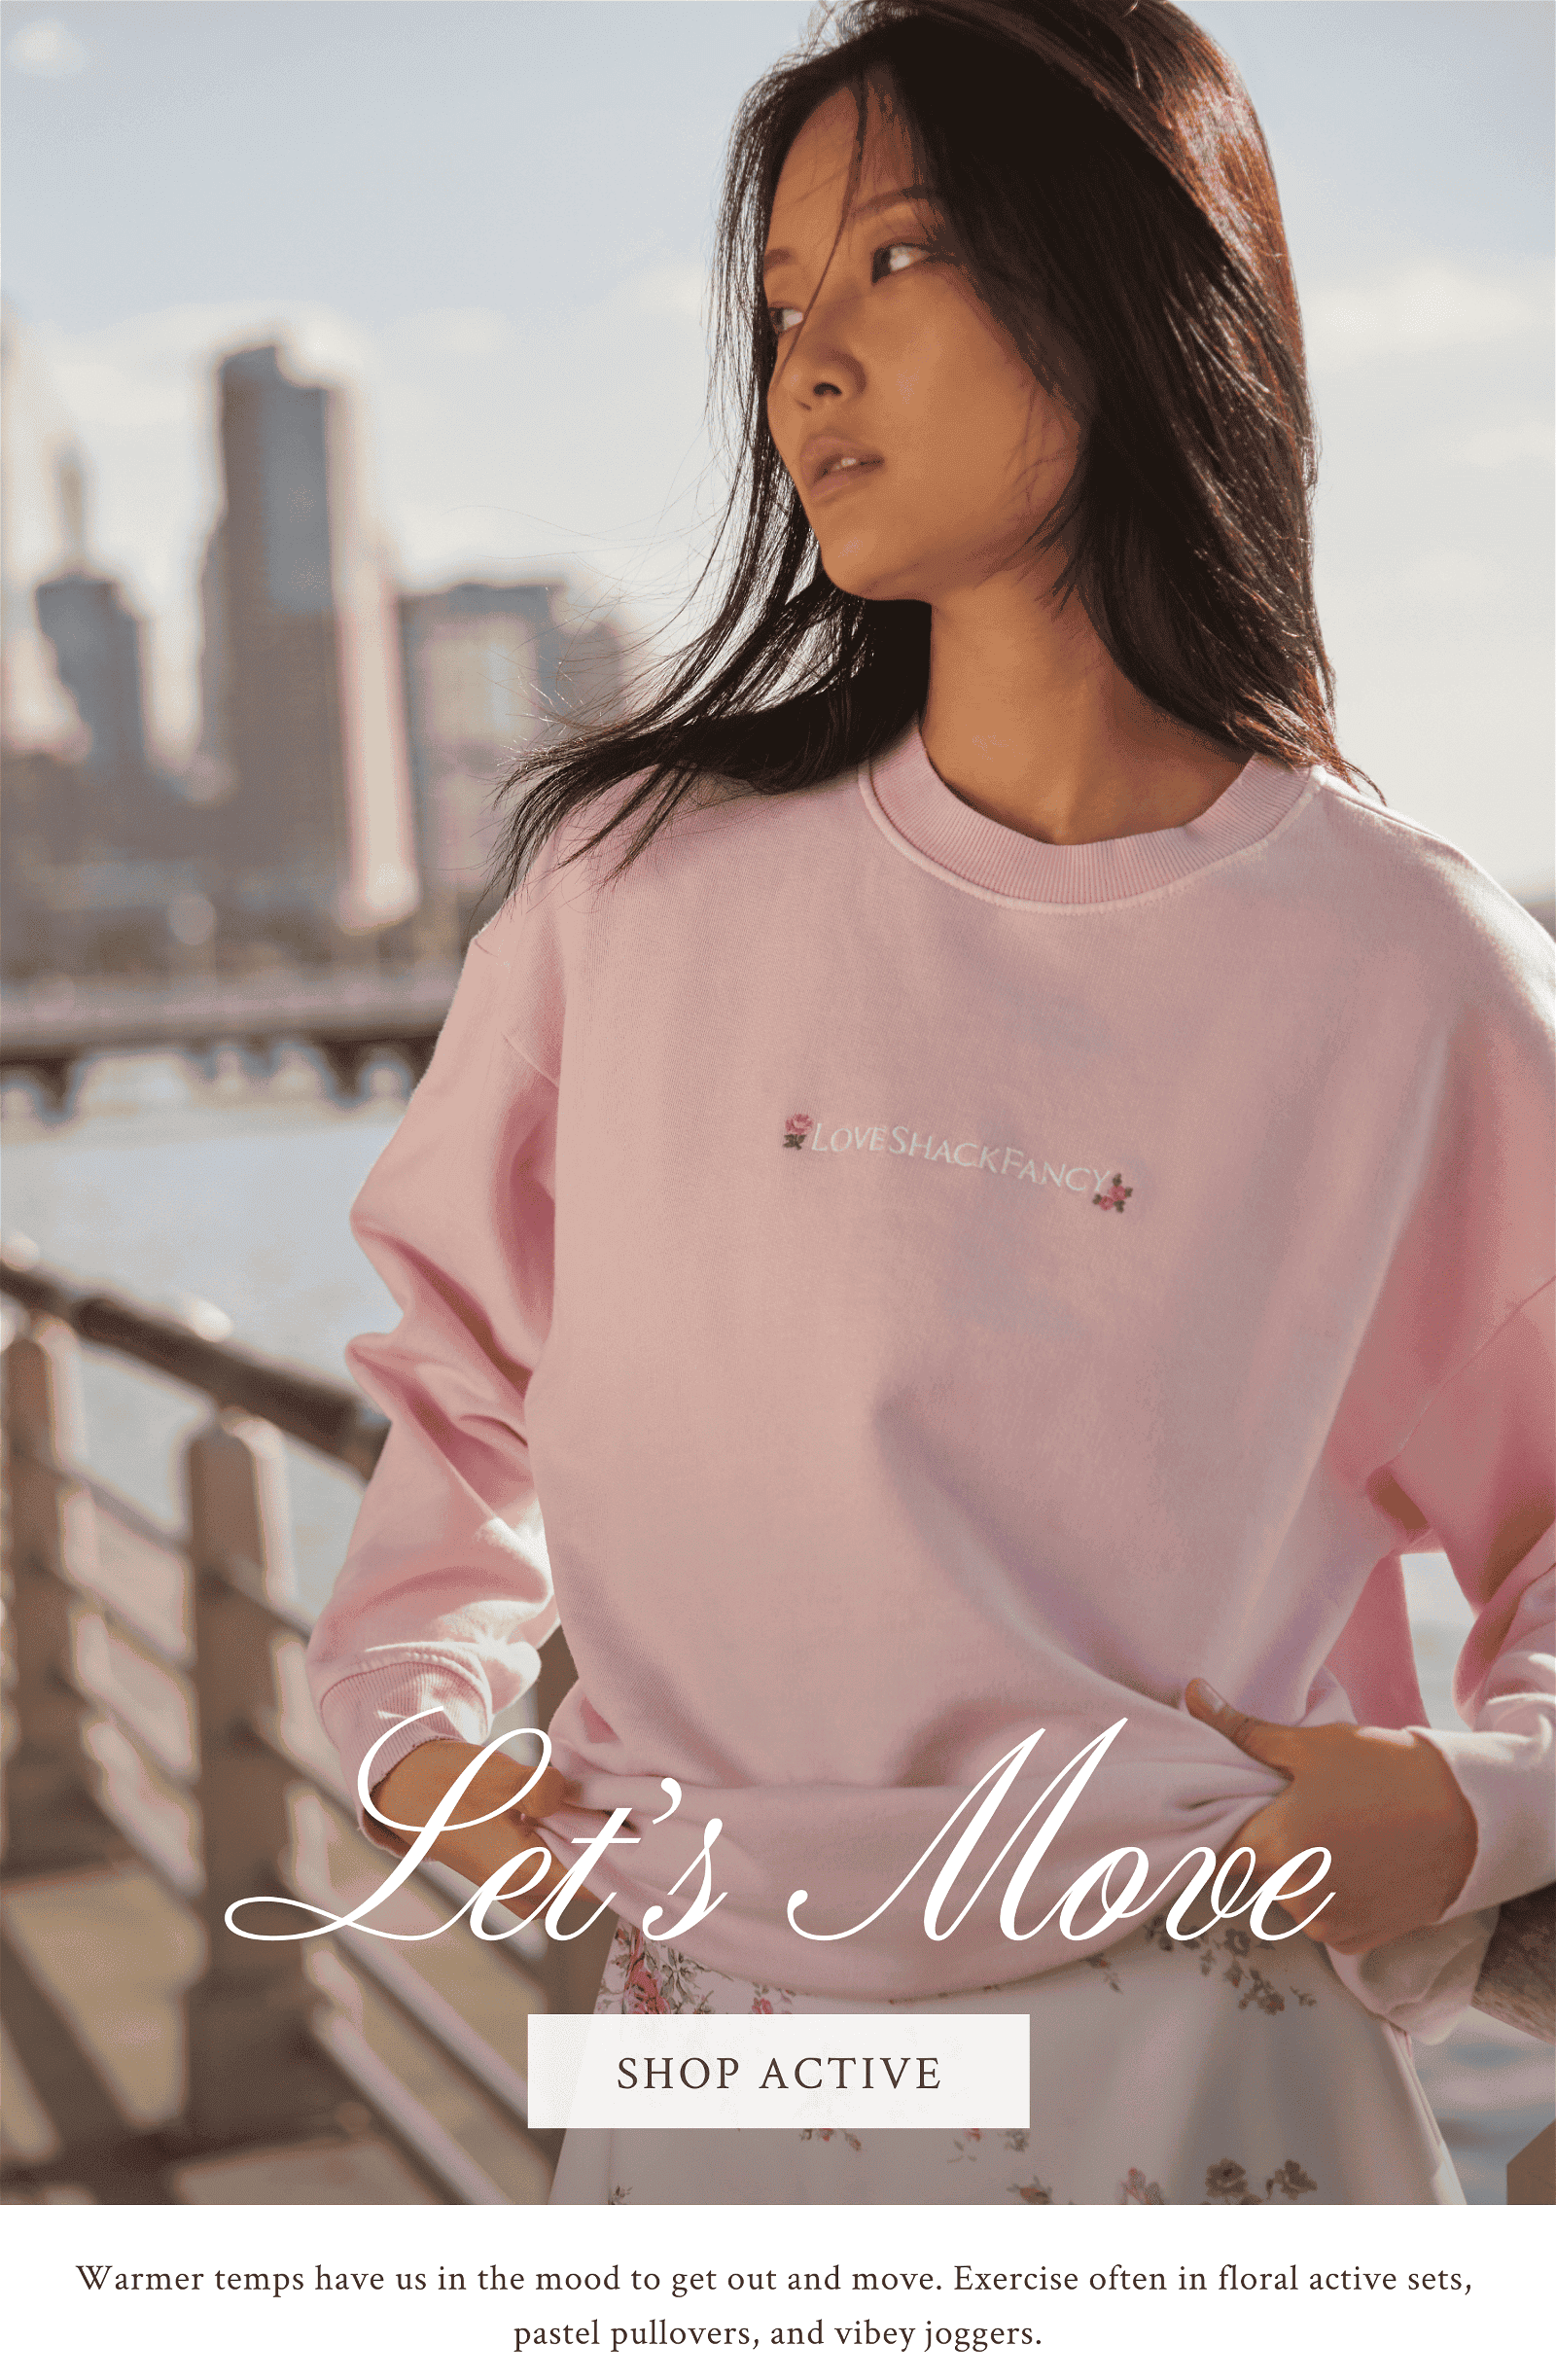 Let's move. Warmer temps have us in the mood to get out and move. Exercise often in floral active sets, pastel pullovers, and vibey joggers.